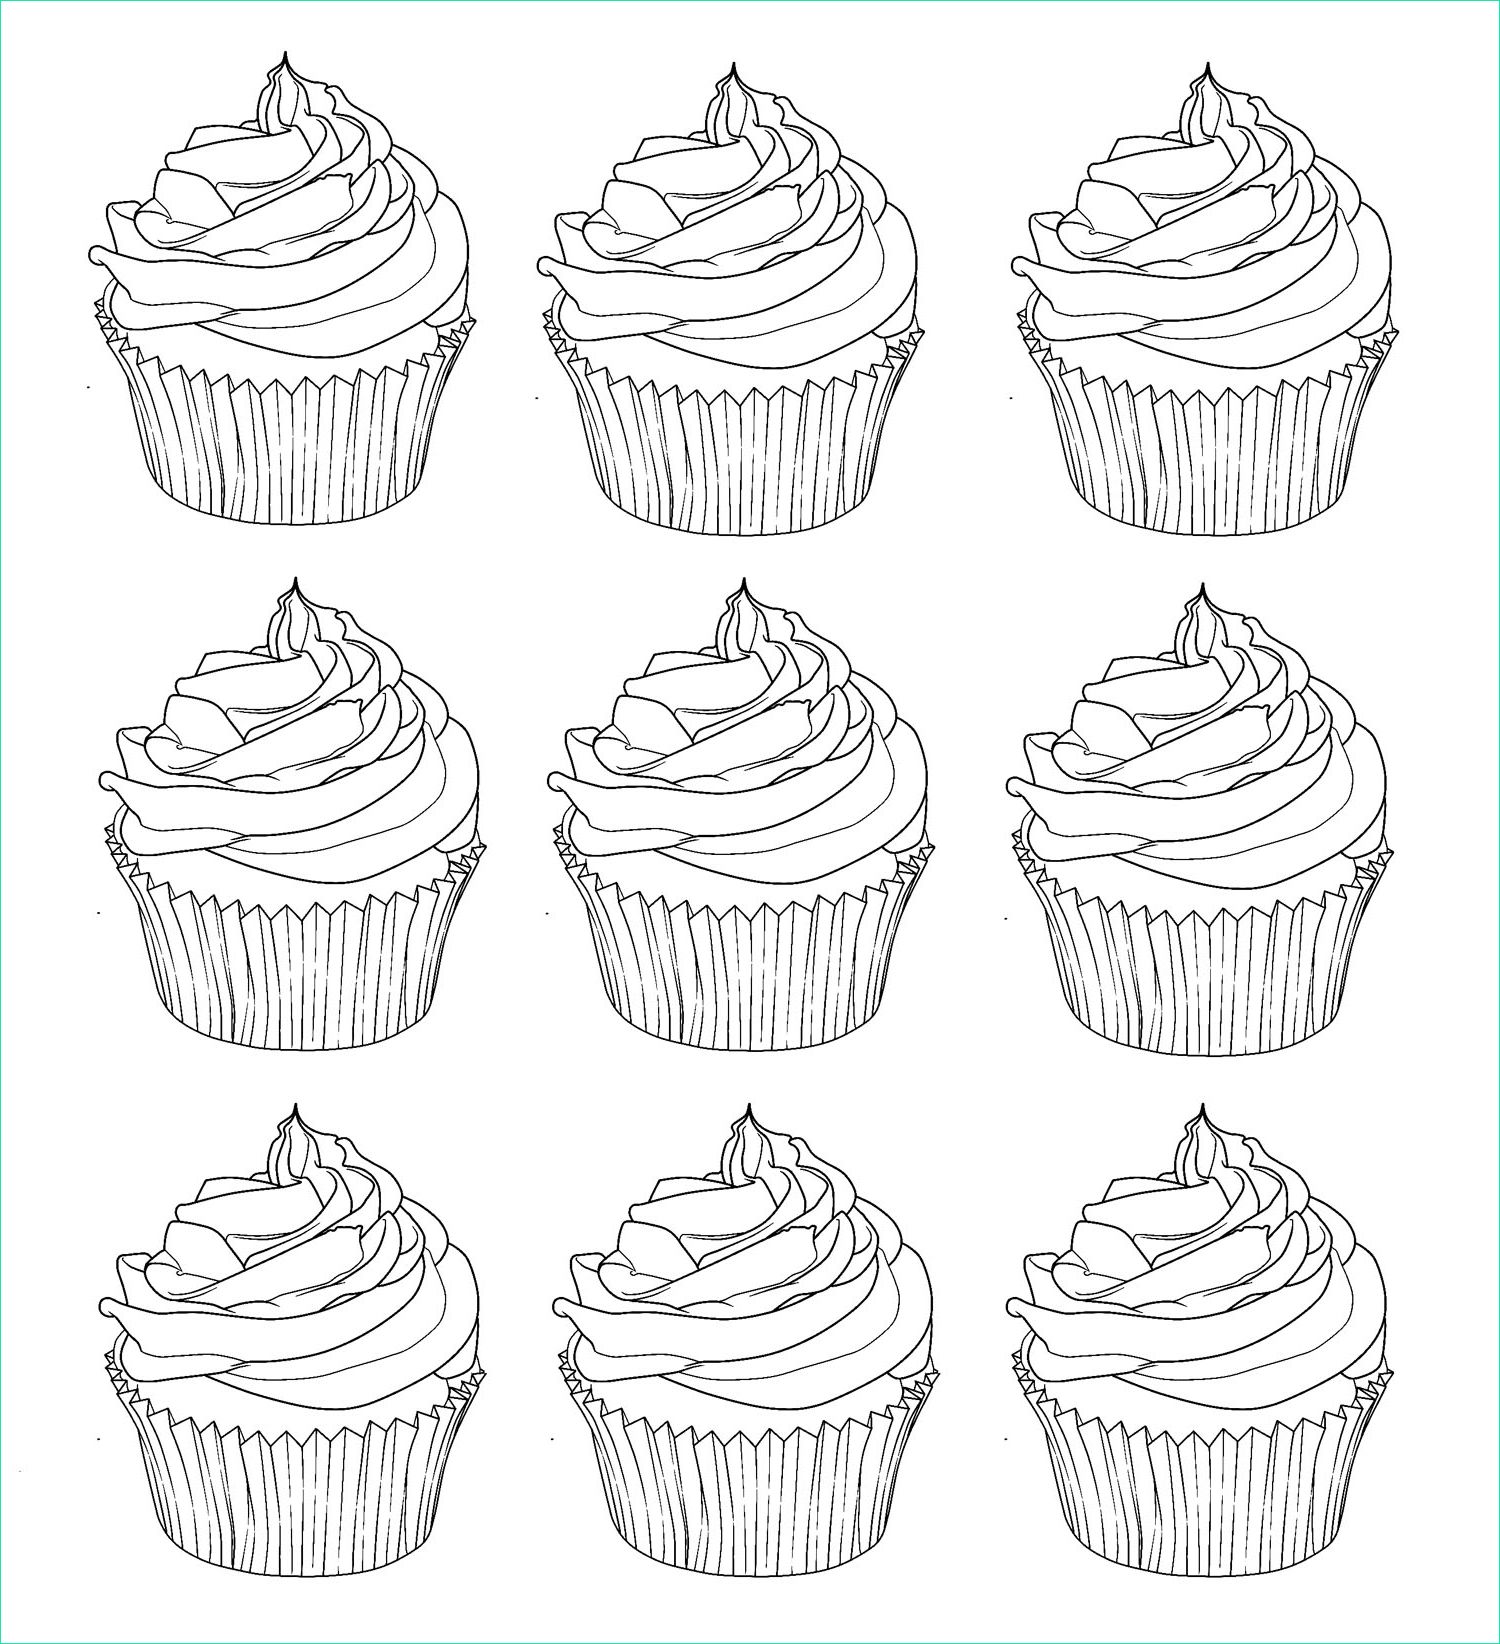 image=cup cakes coloriage cupcakes warhol 1